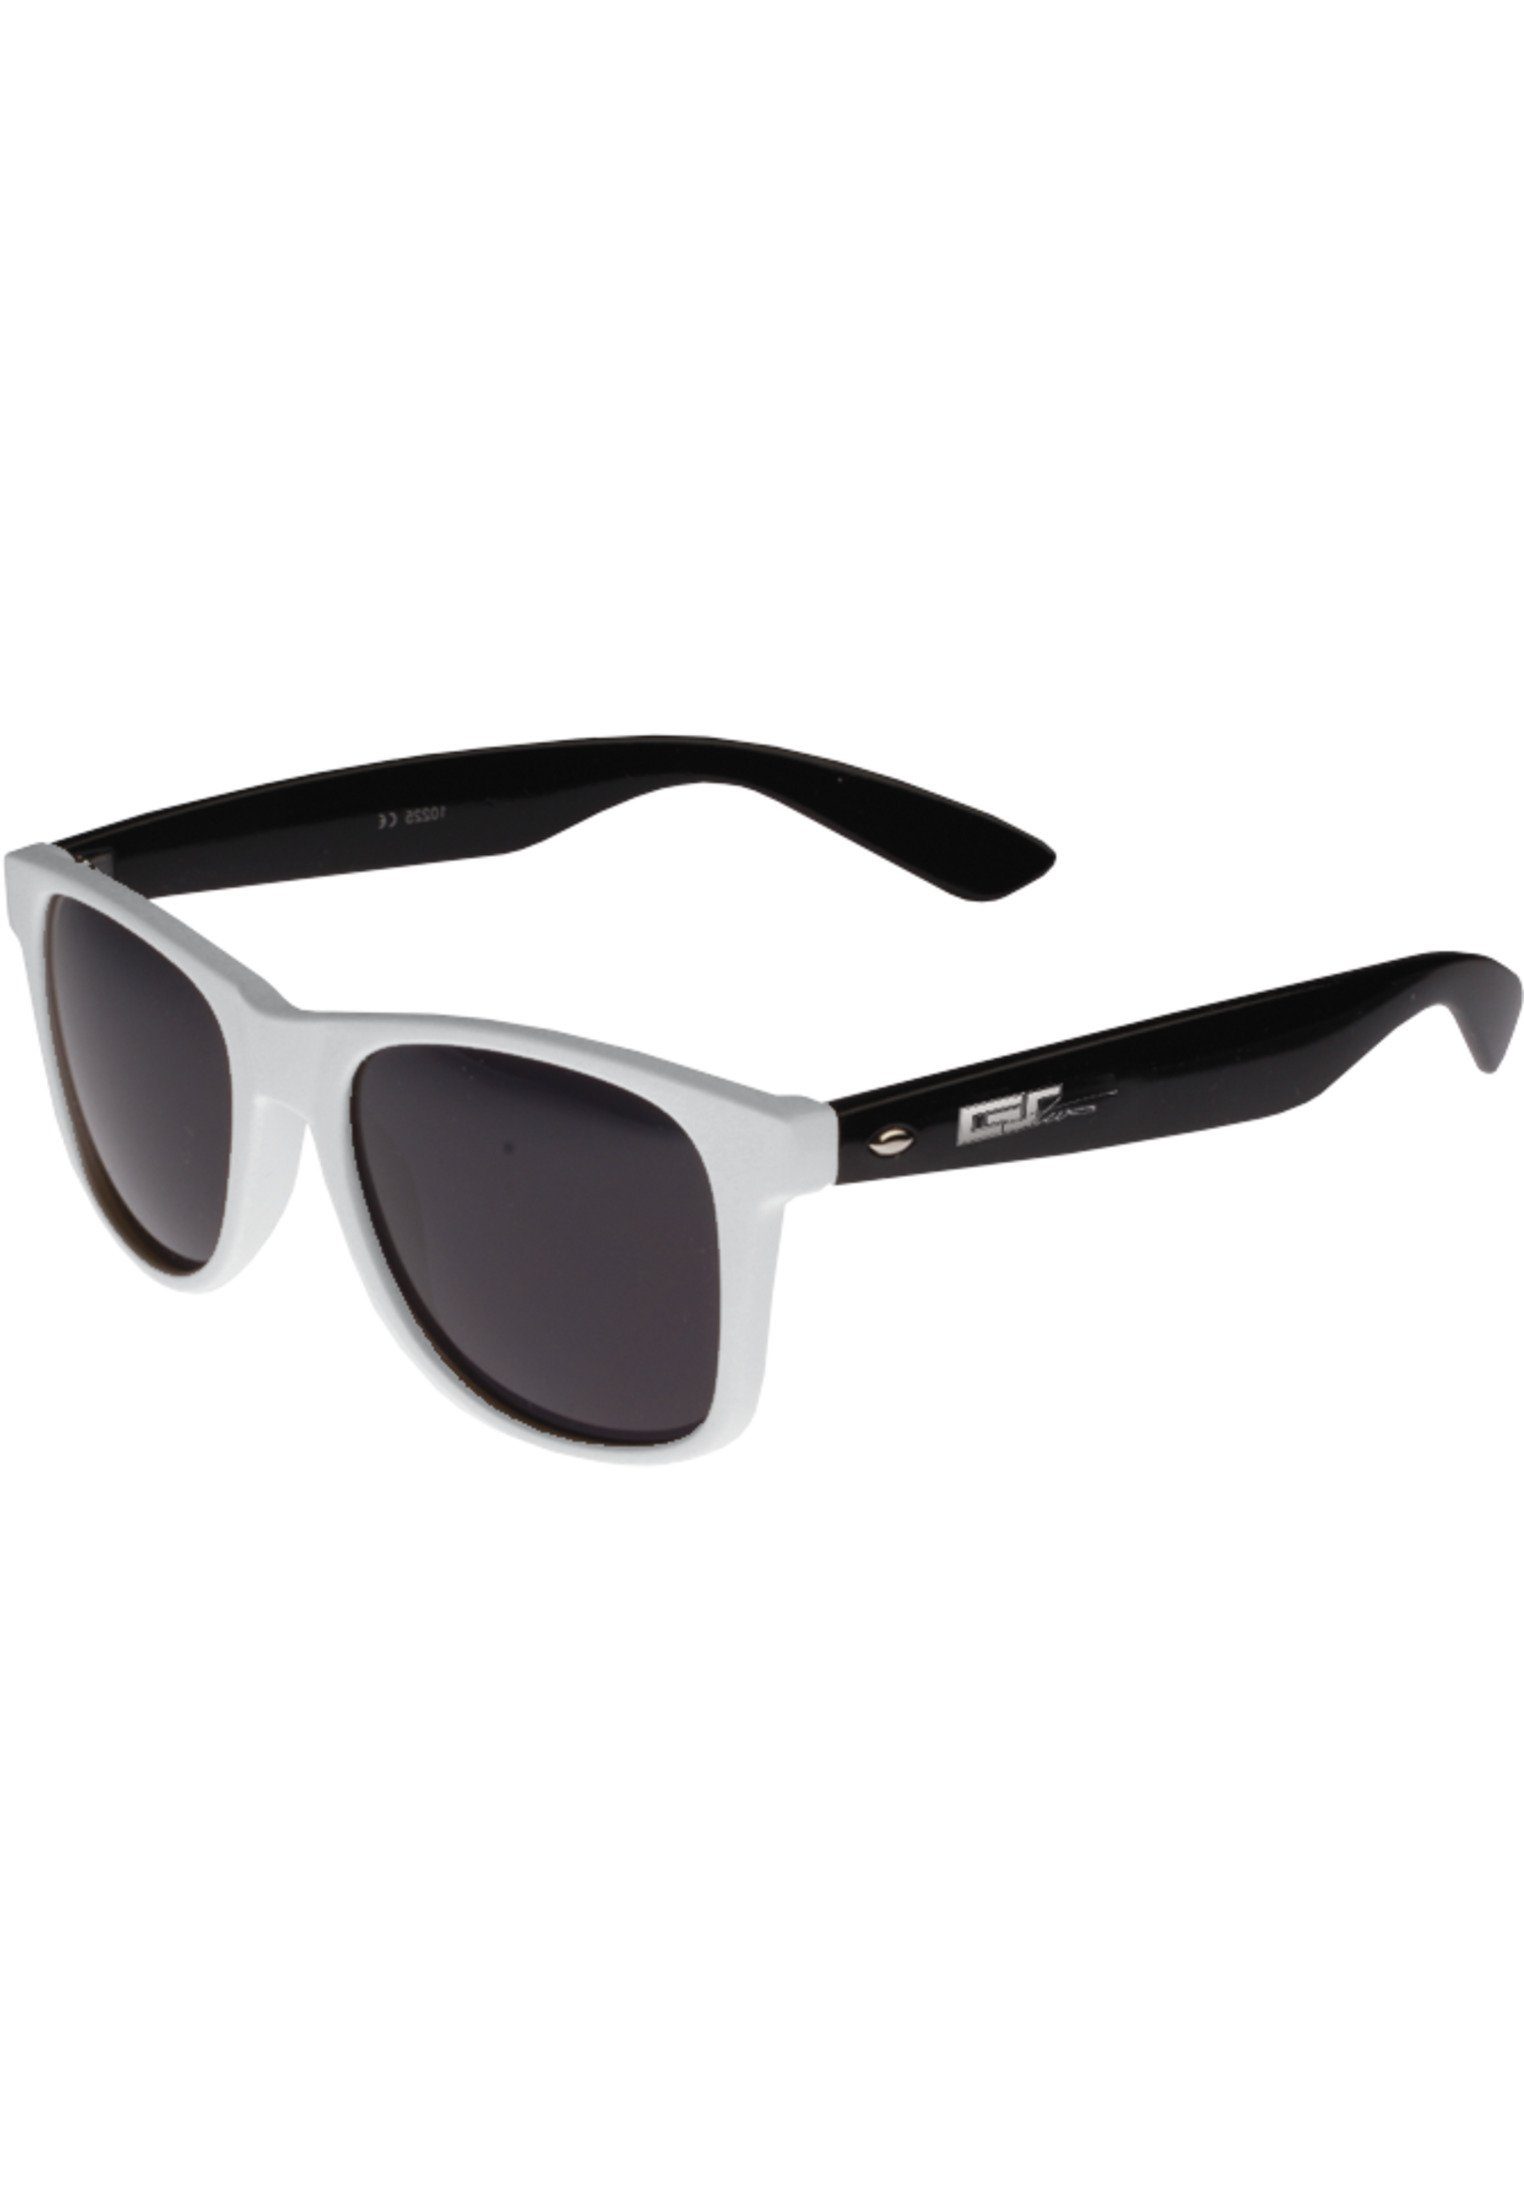 white/black GStwo Shades Sonnenbrille MSTRDS Groove Accessoires